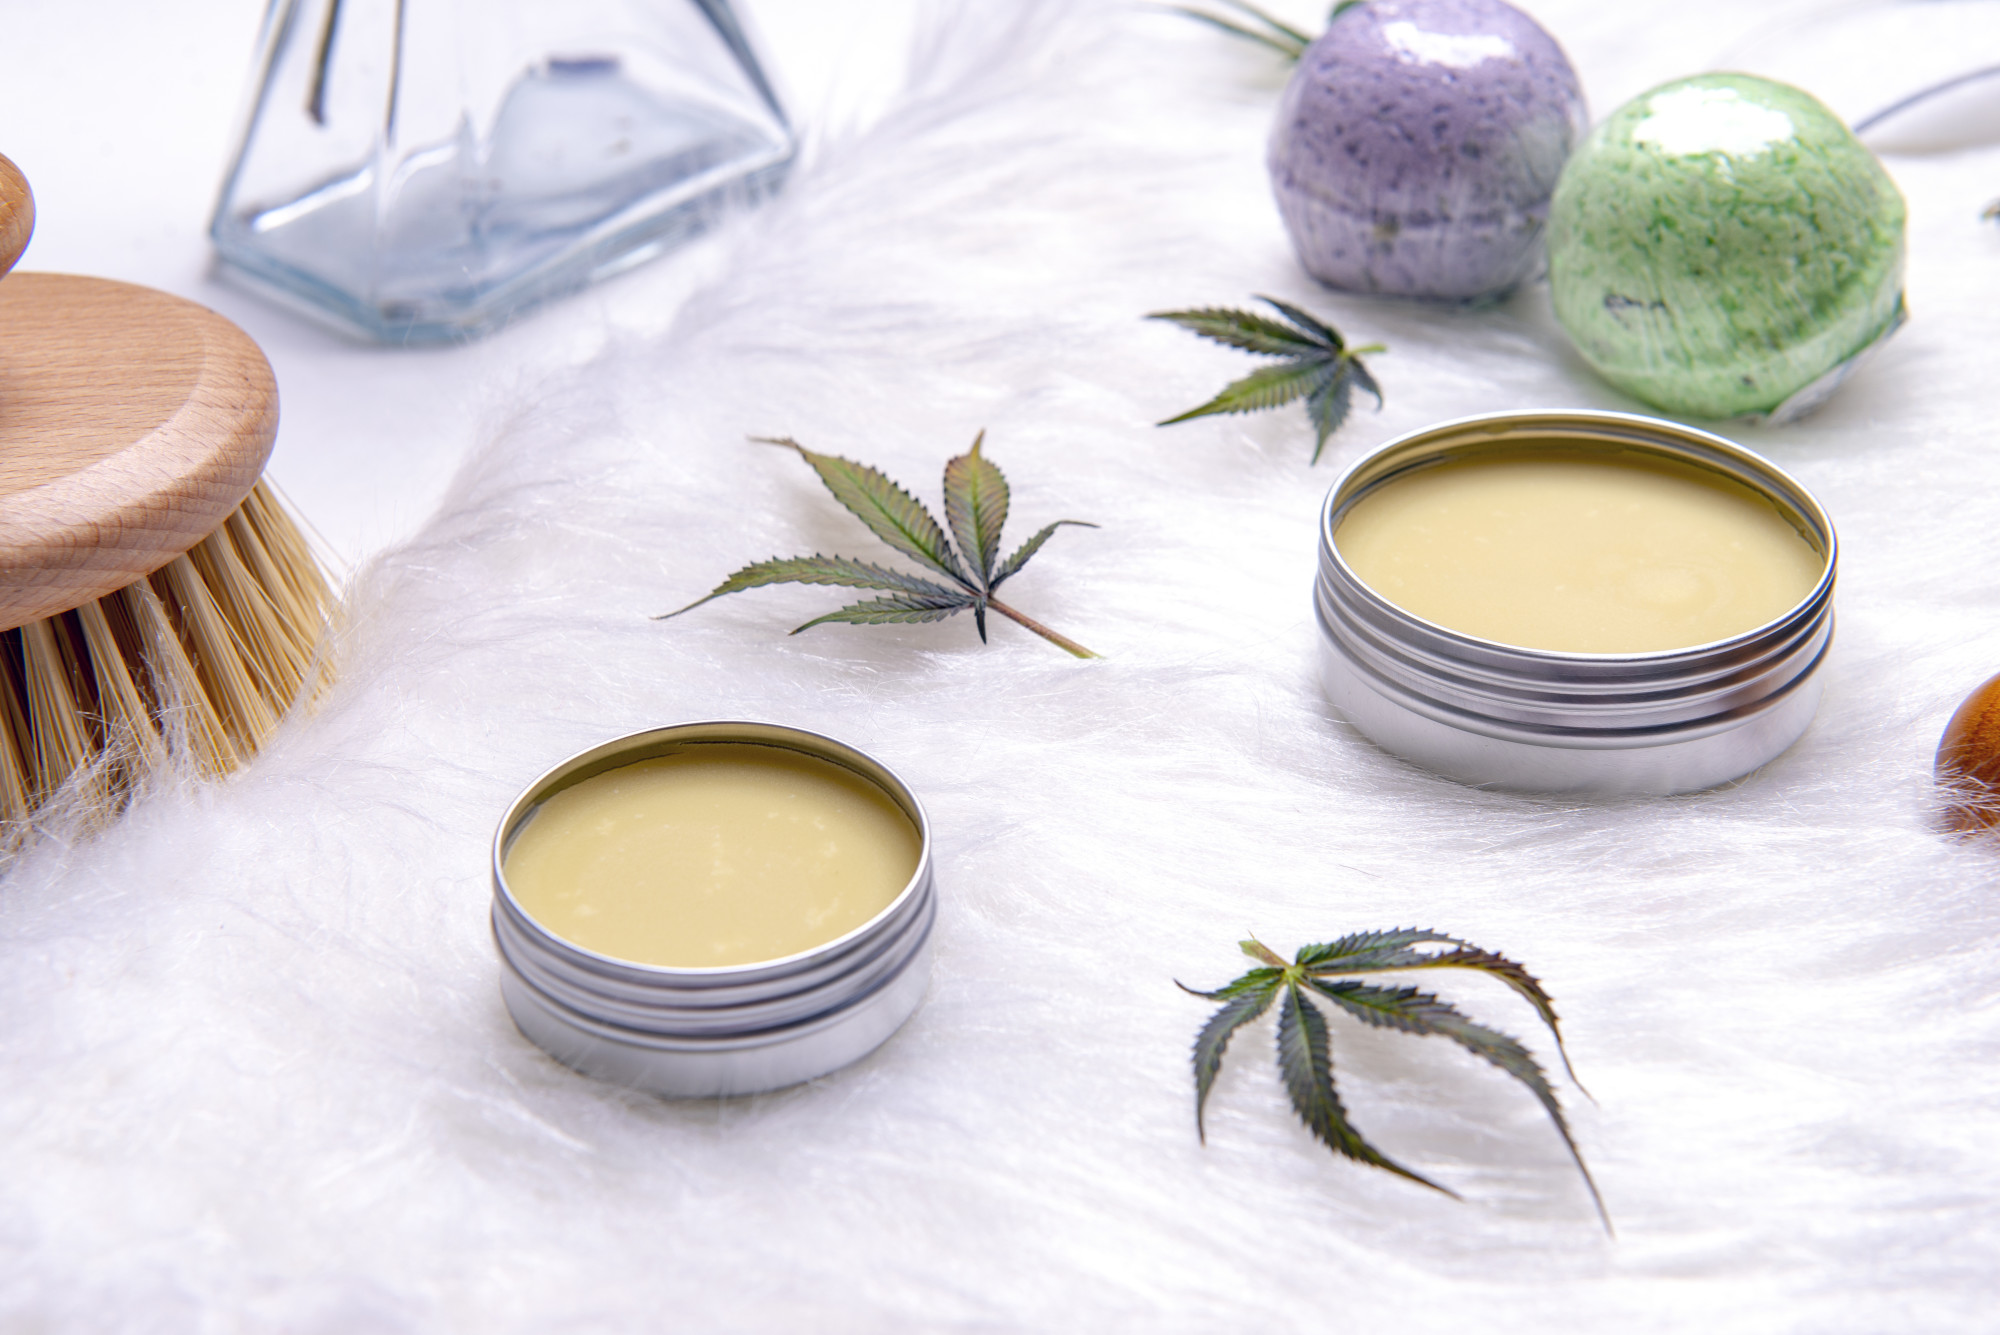 Why You Should Add CBD Skin Care Products into Your Daily Routine